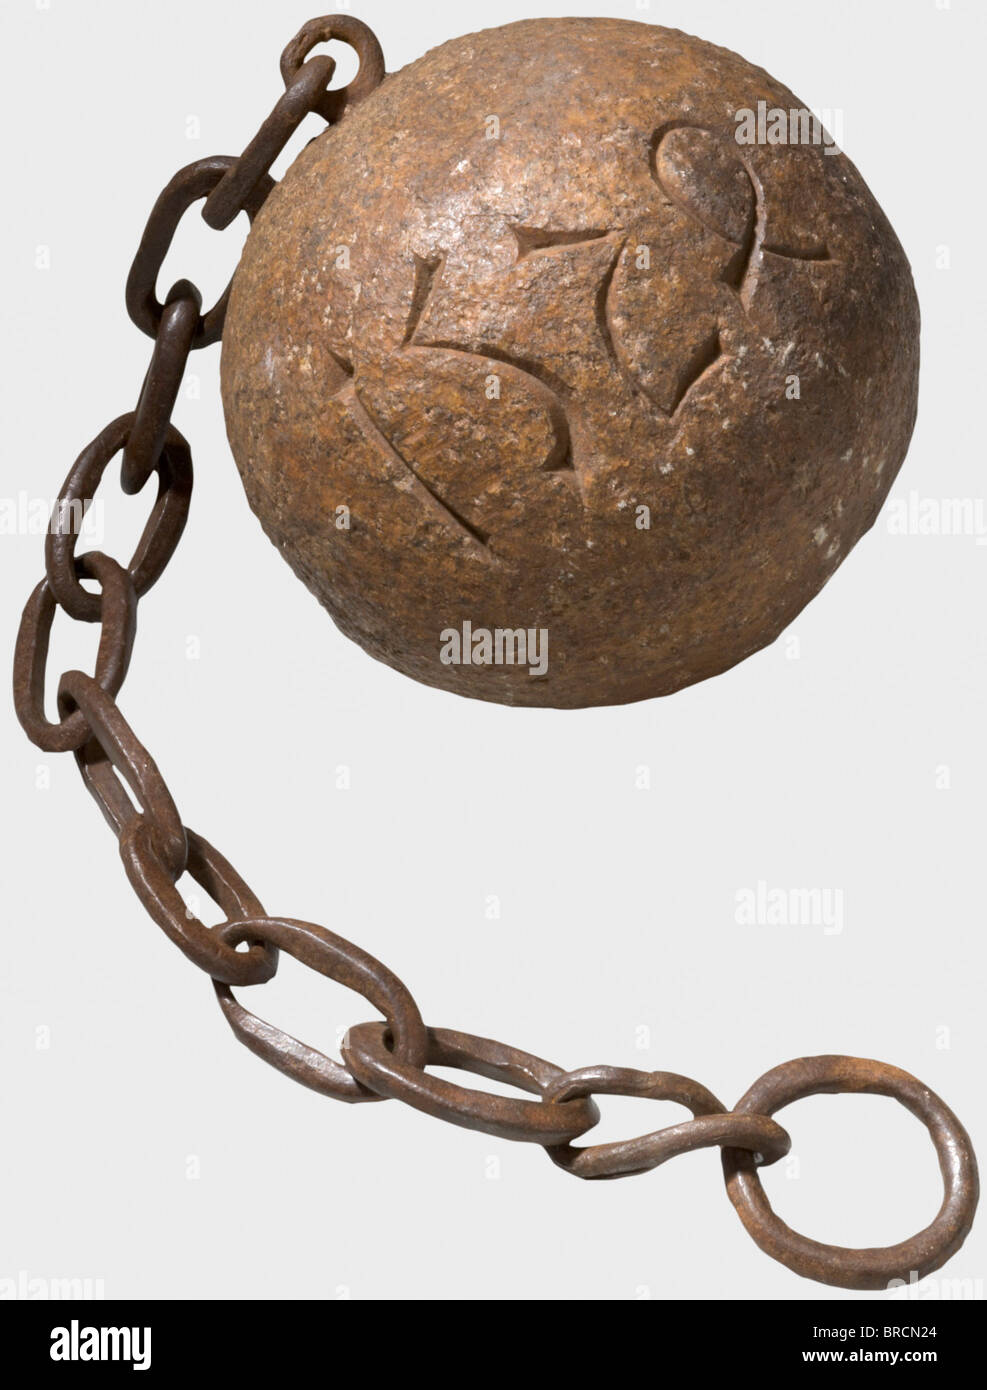 A German ball and chain, dated 1524 Ball of granite with engraved date '1524' and heavy, inset iron chain. Chain links with visible traces of wear. Weight 24.5 kg. historic, historical, 16th century, instrument of torture, torture device, instruments of torture, torture devices, object, objects, stills, clipping, clippings, cut out, cut-out, cut-outs, Stock Photo